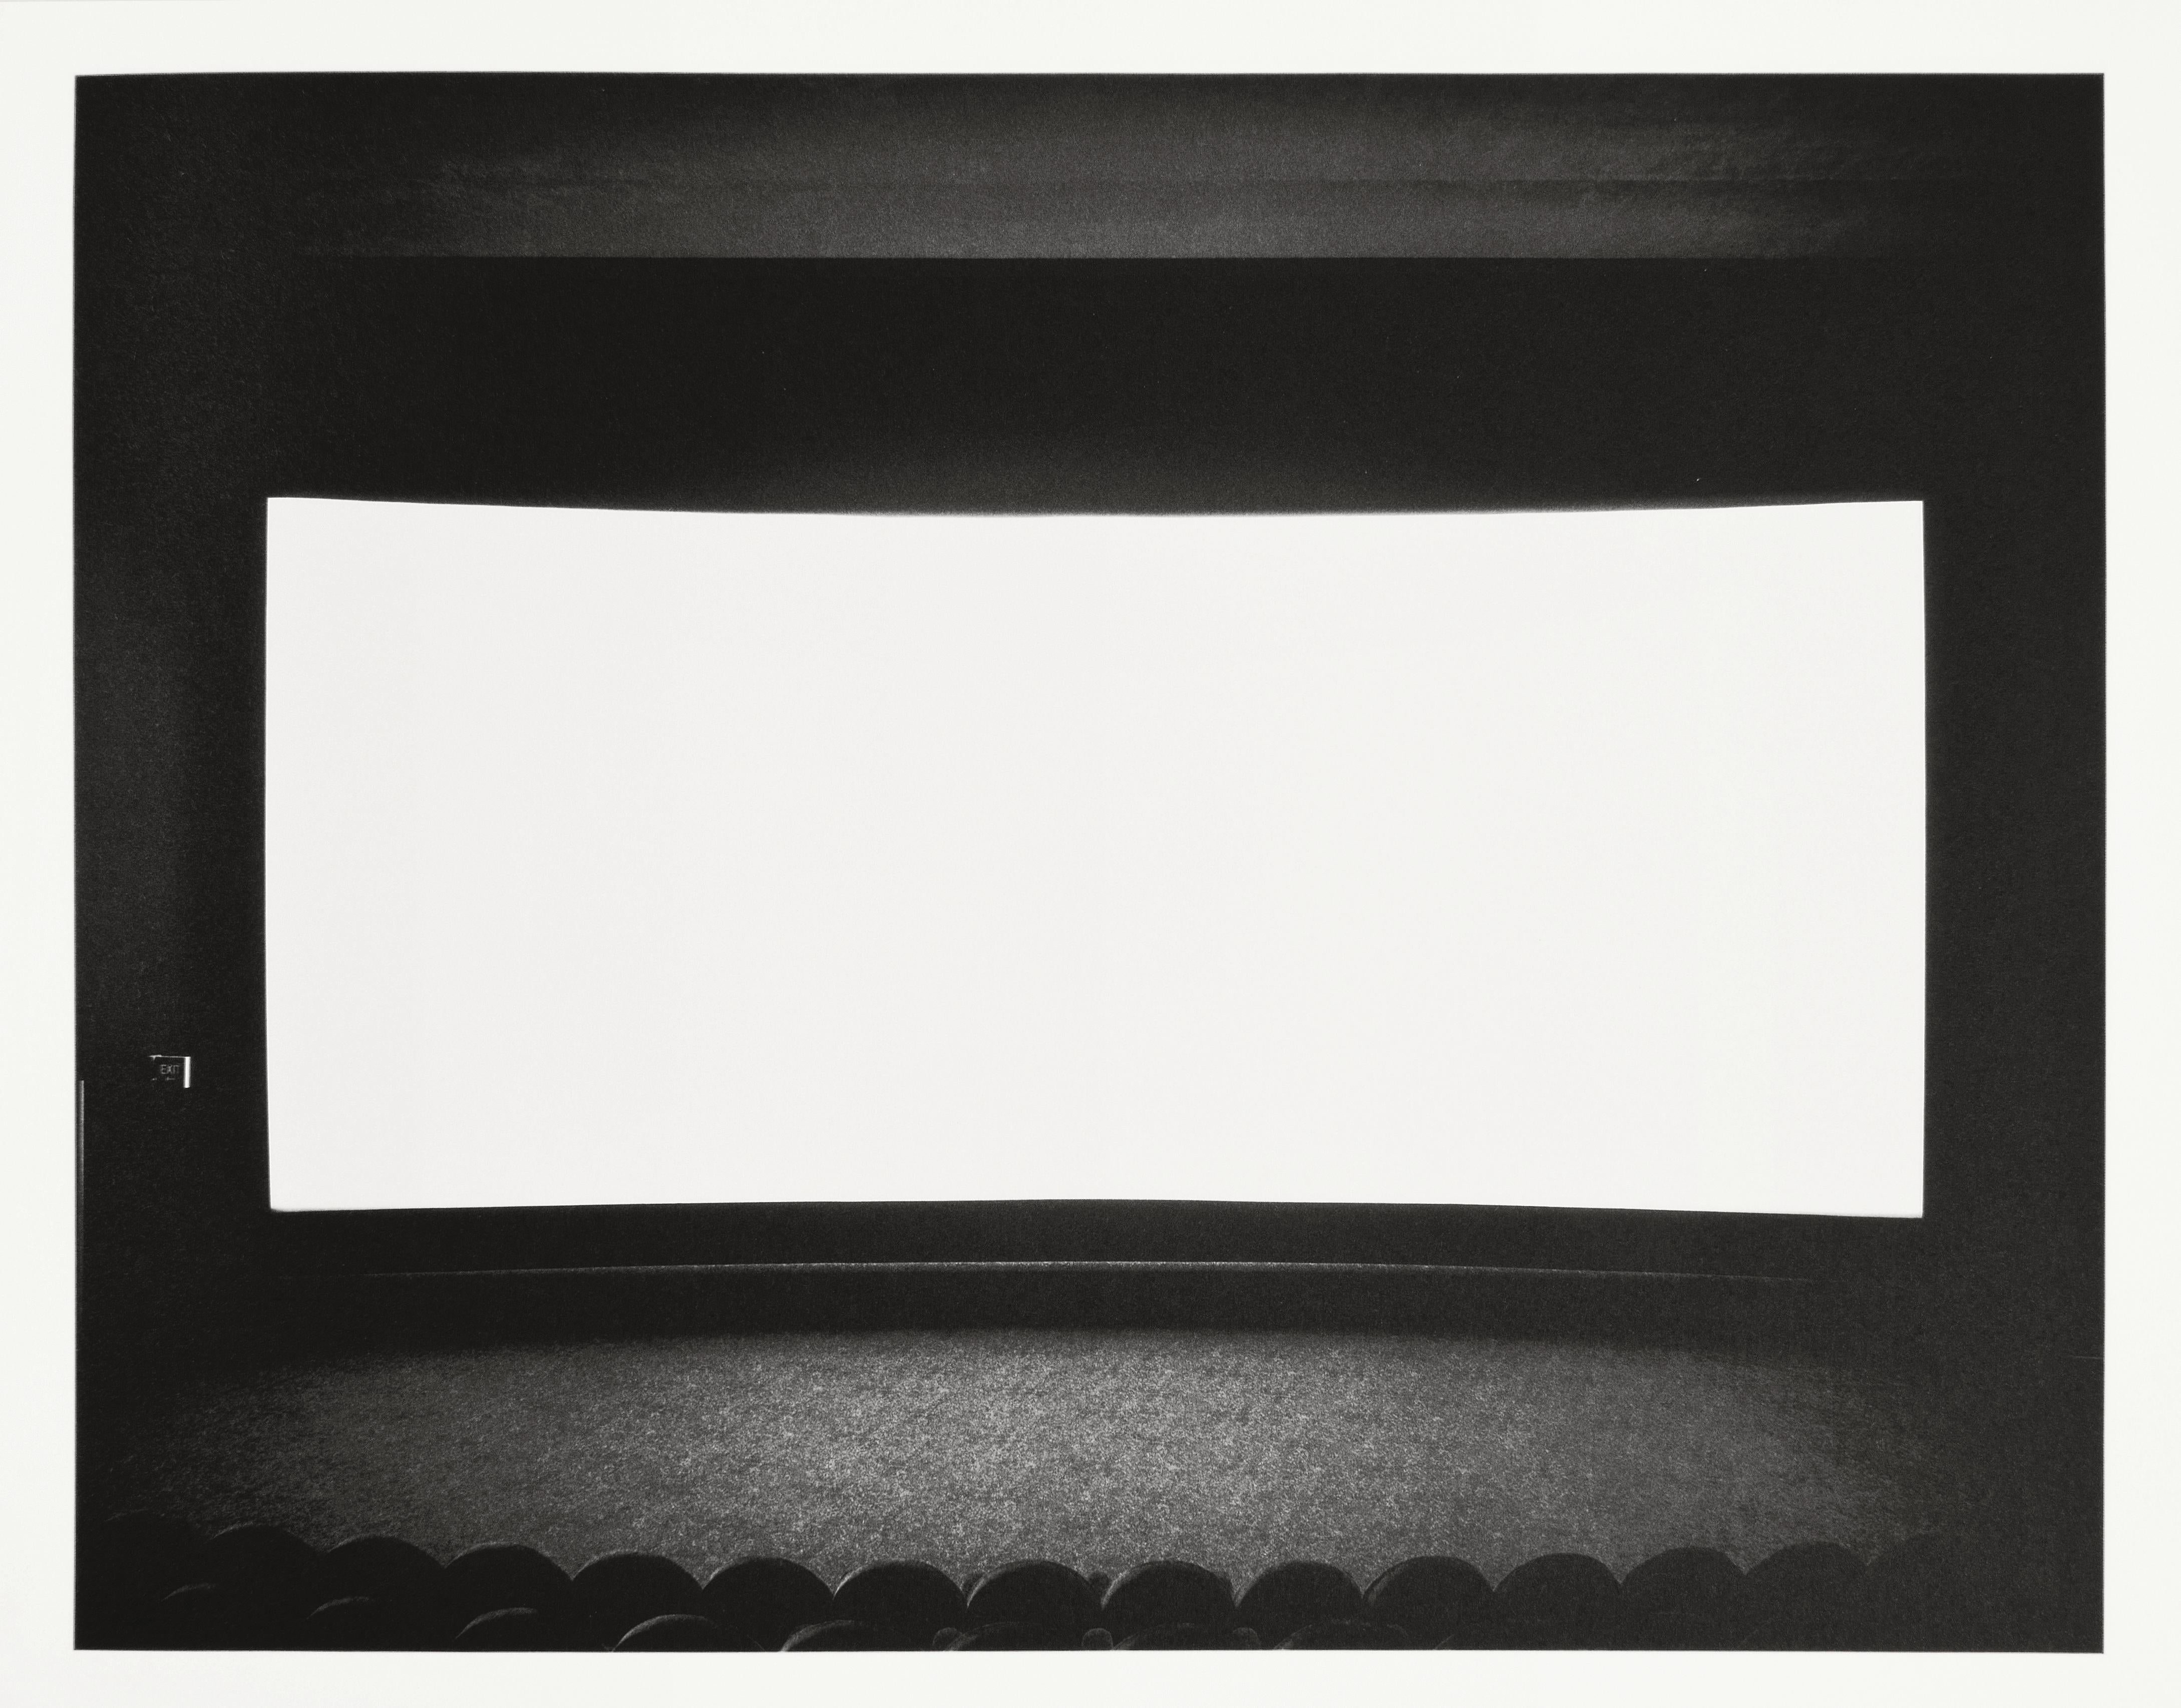 Theaters by Hans Belting, 2001 - Black Black and White Photograph by Hiroshi Sugimoto